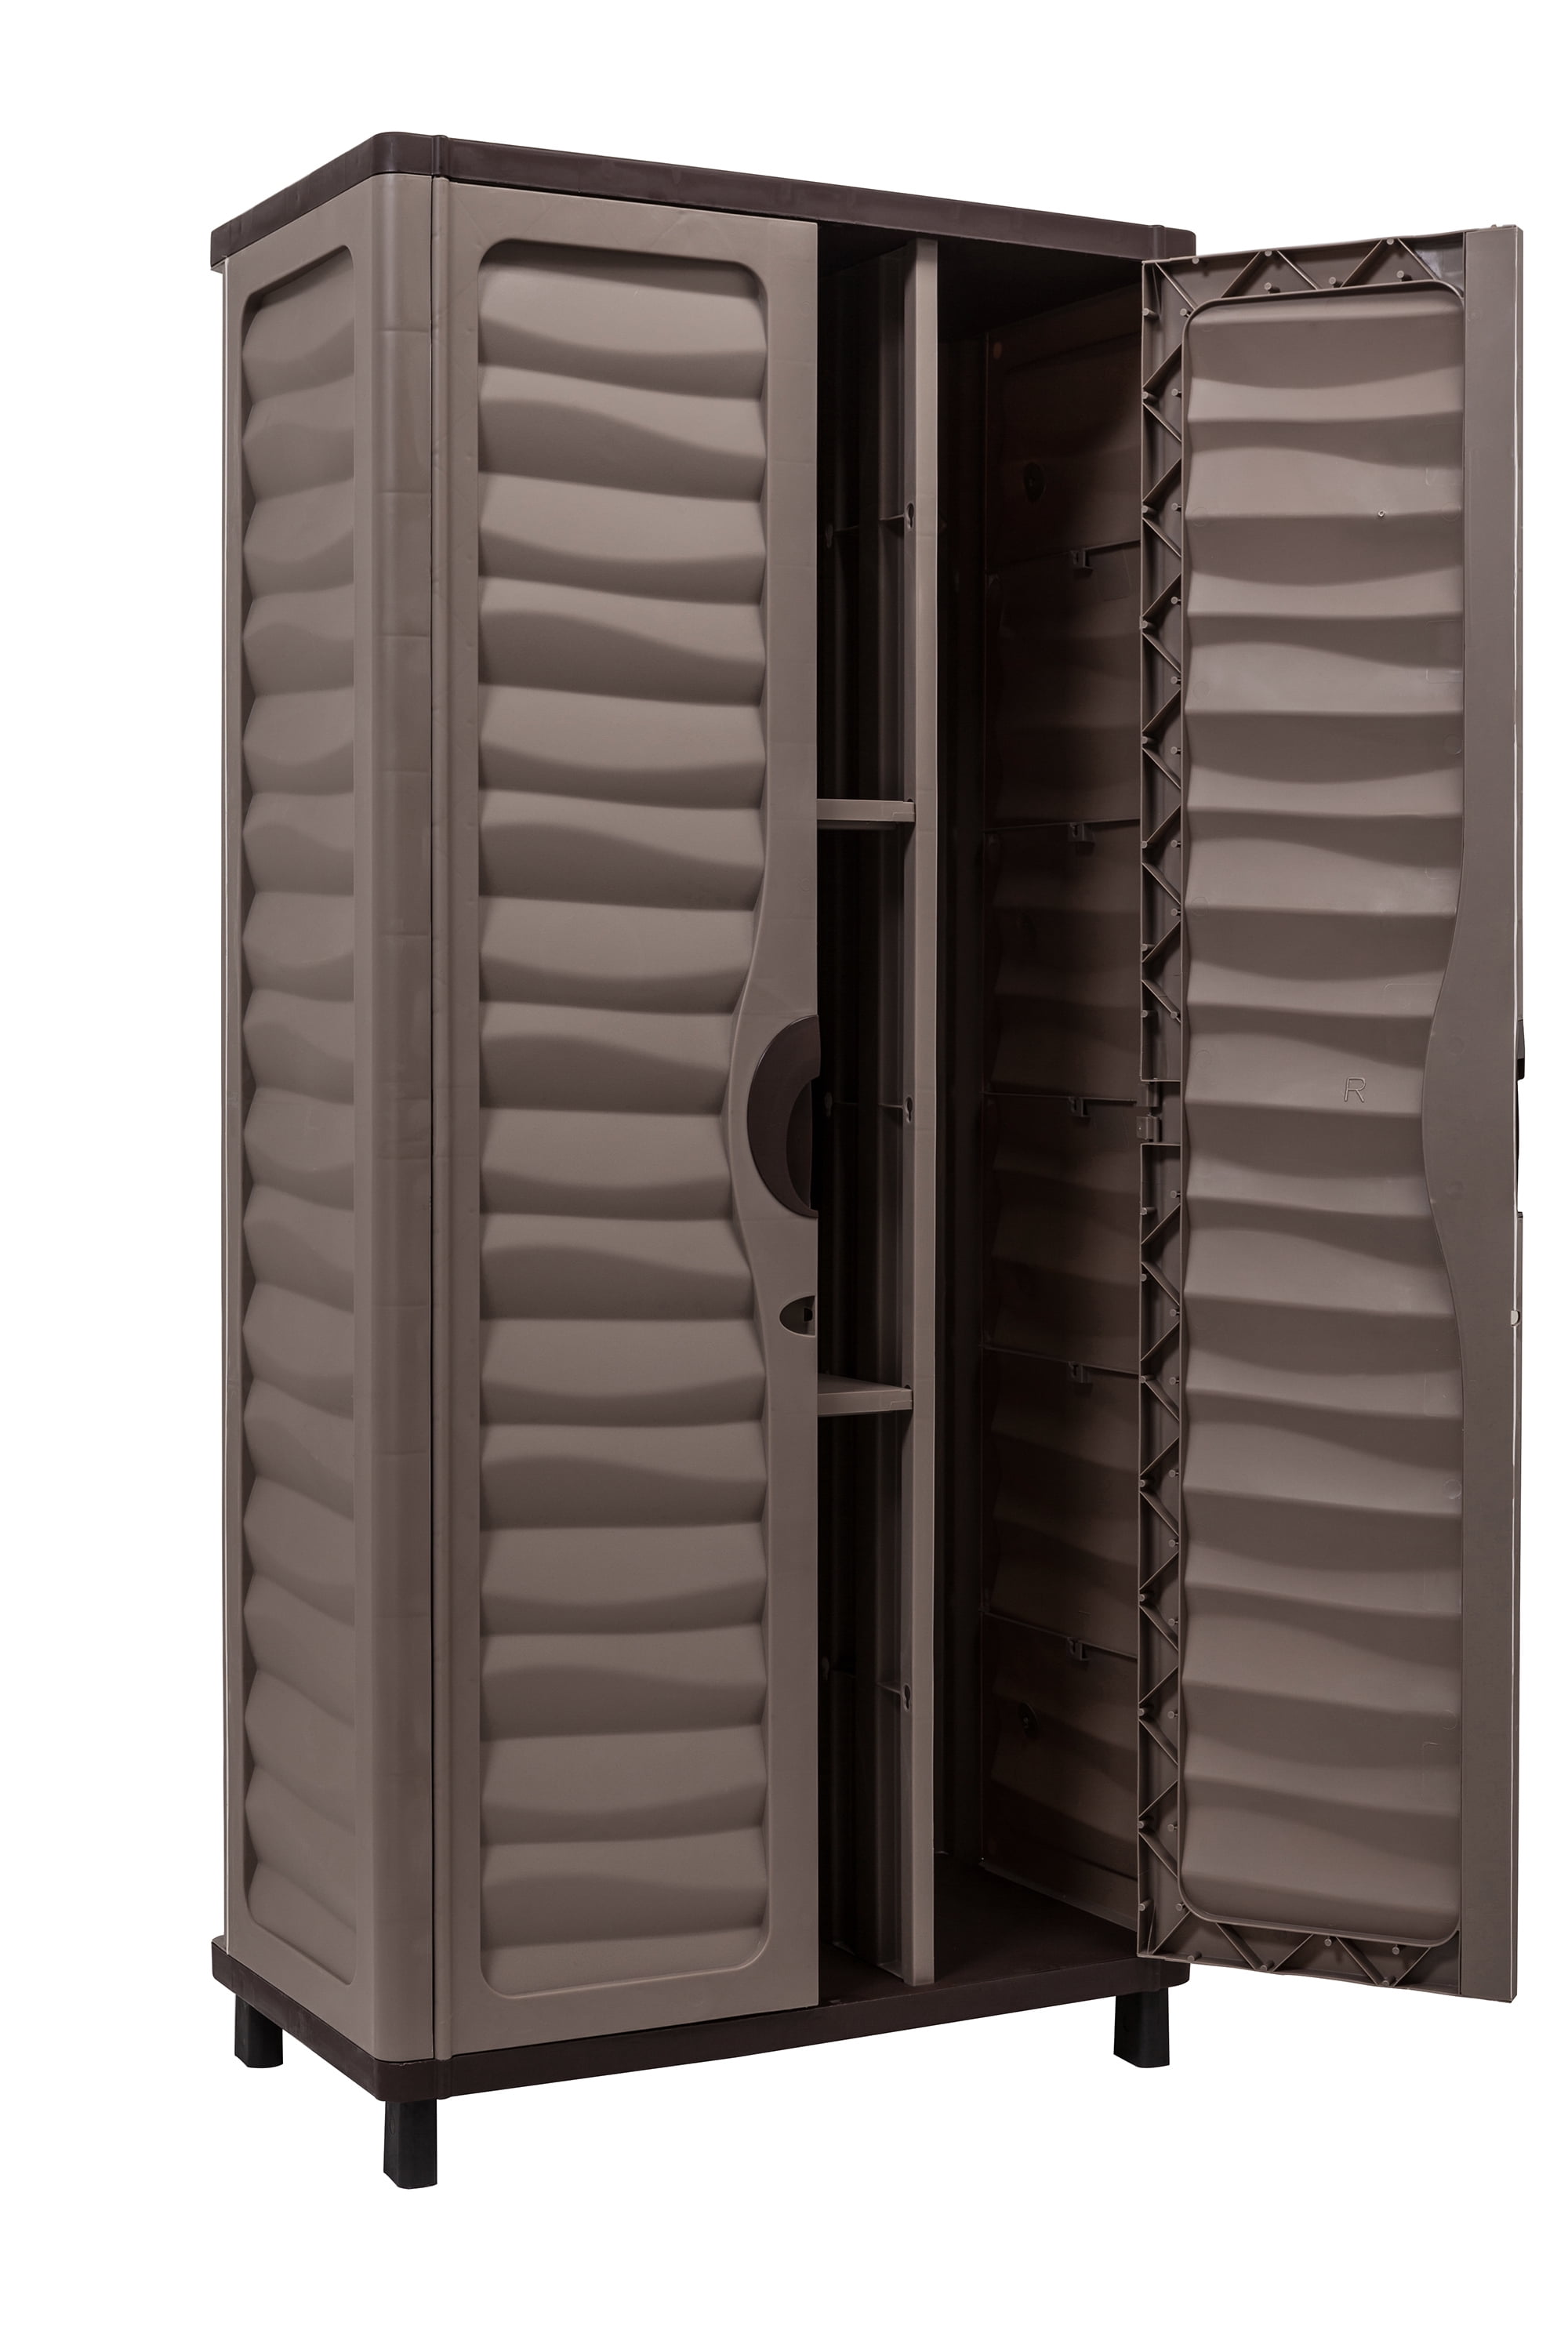 Tall Outdoor Storage Cabinet Garden Utility Plastic Horizontal Shed